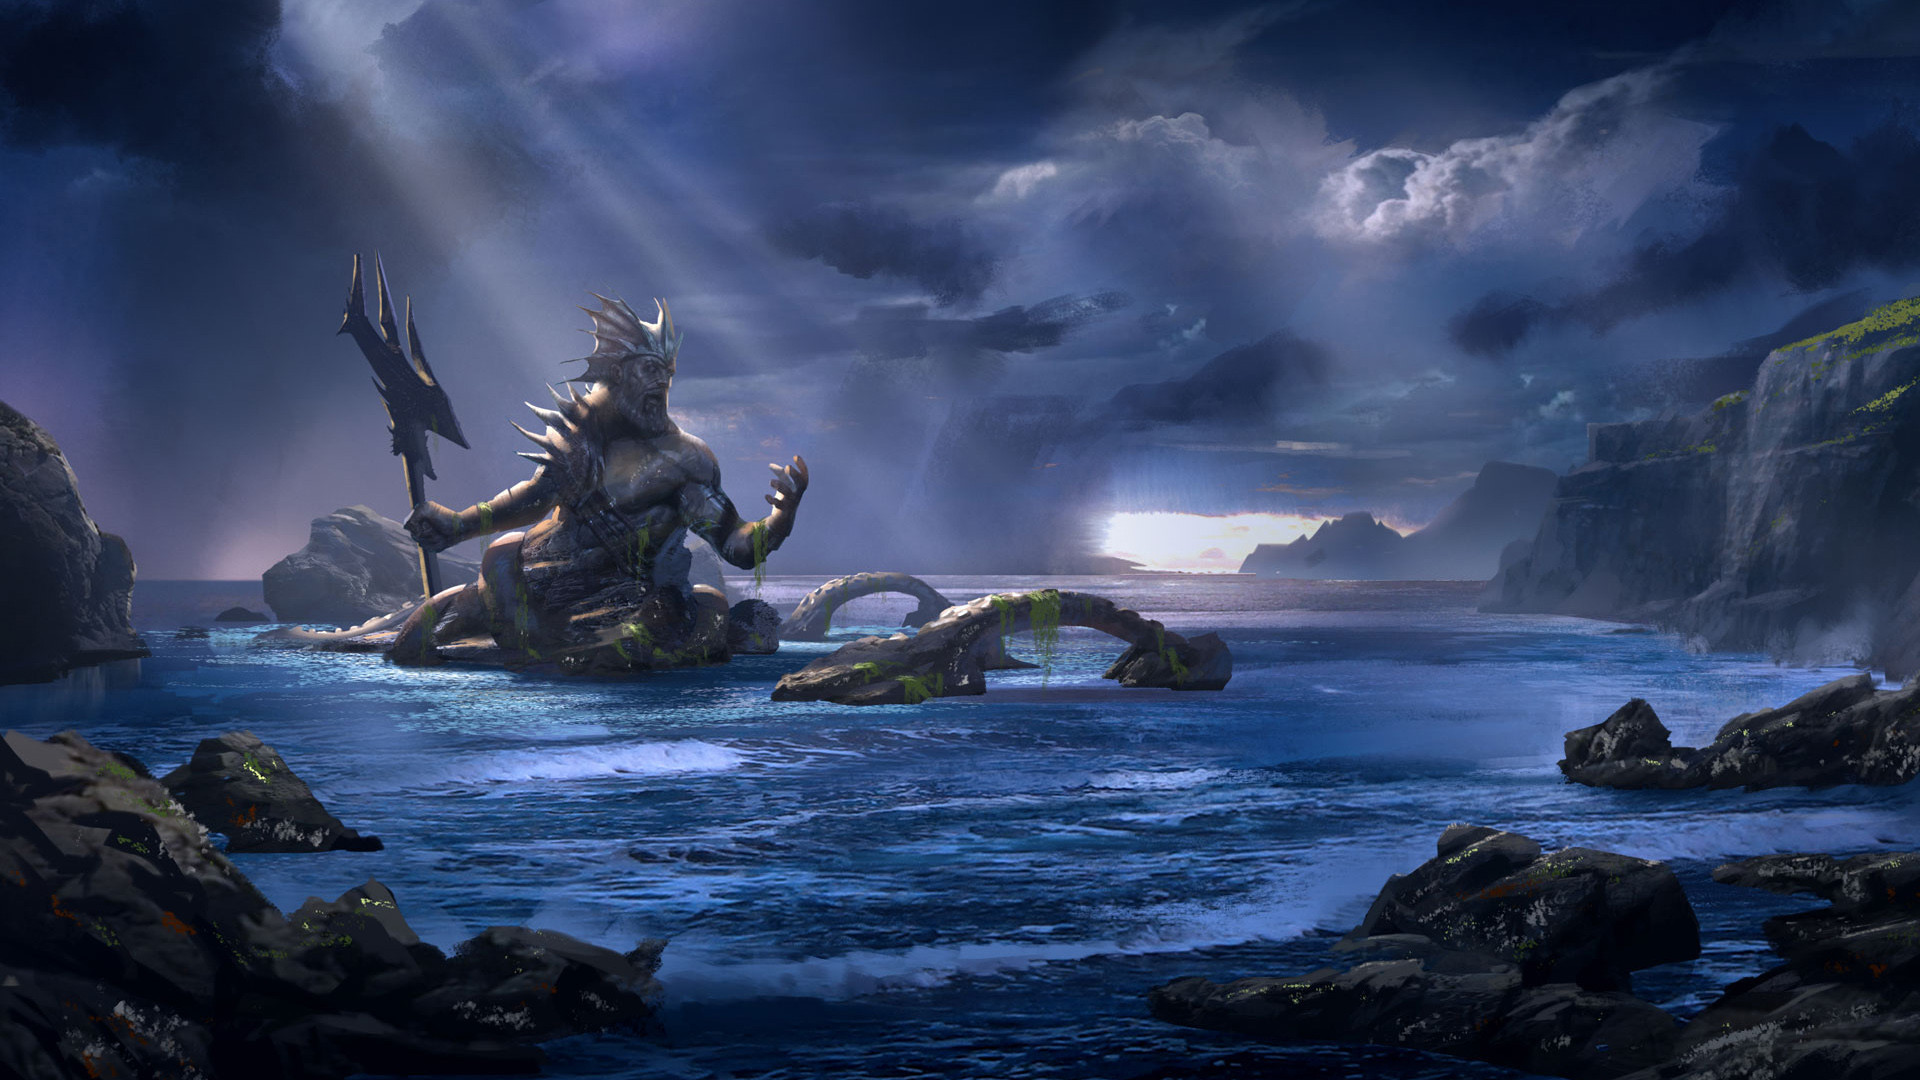 Shiva Dangerous Look Animated Wallpaper Src Free - Hd Wallpapers 1080p  Download For Pc - 1920x1080 Wallpaper 